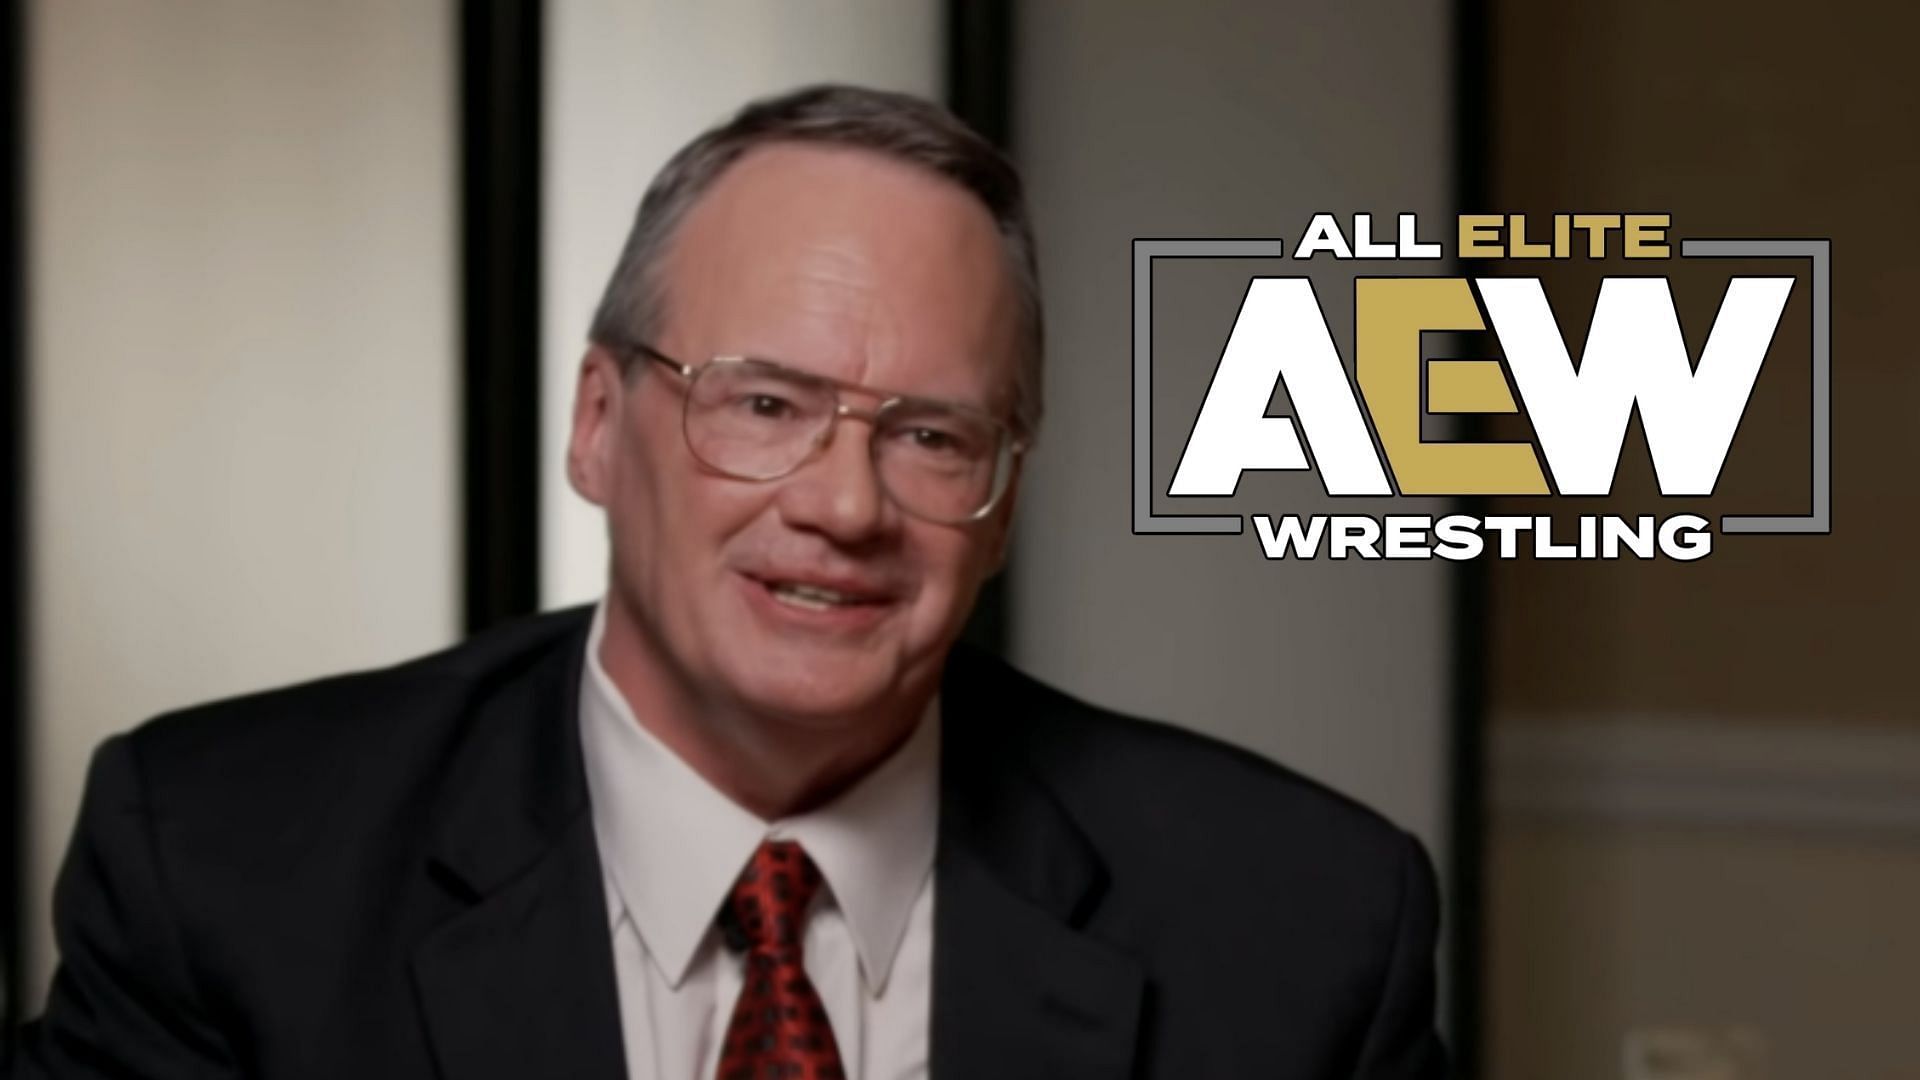 Jim Cornette is not impressed by this popular AEW talent.